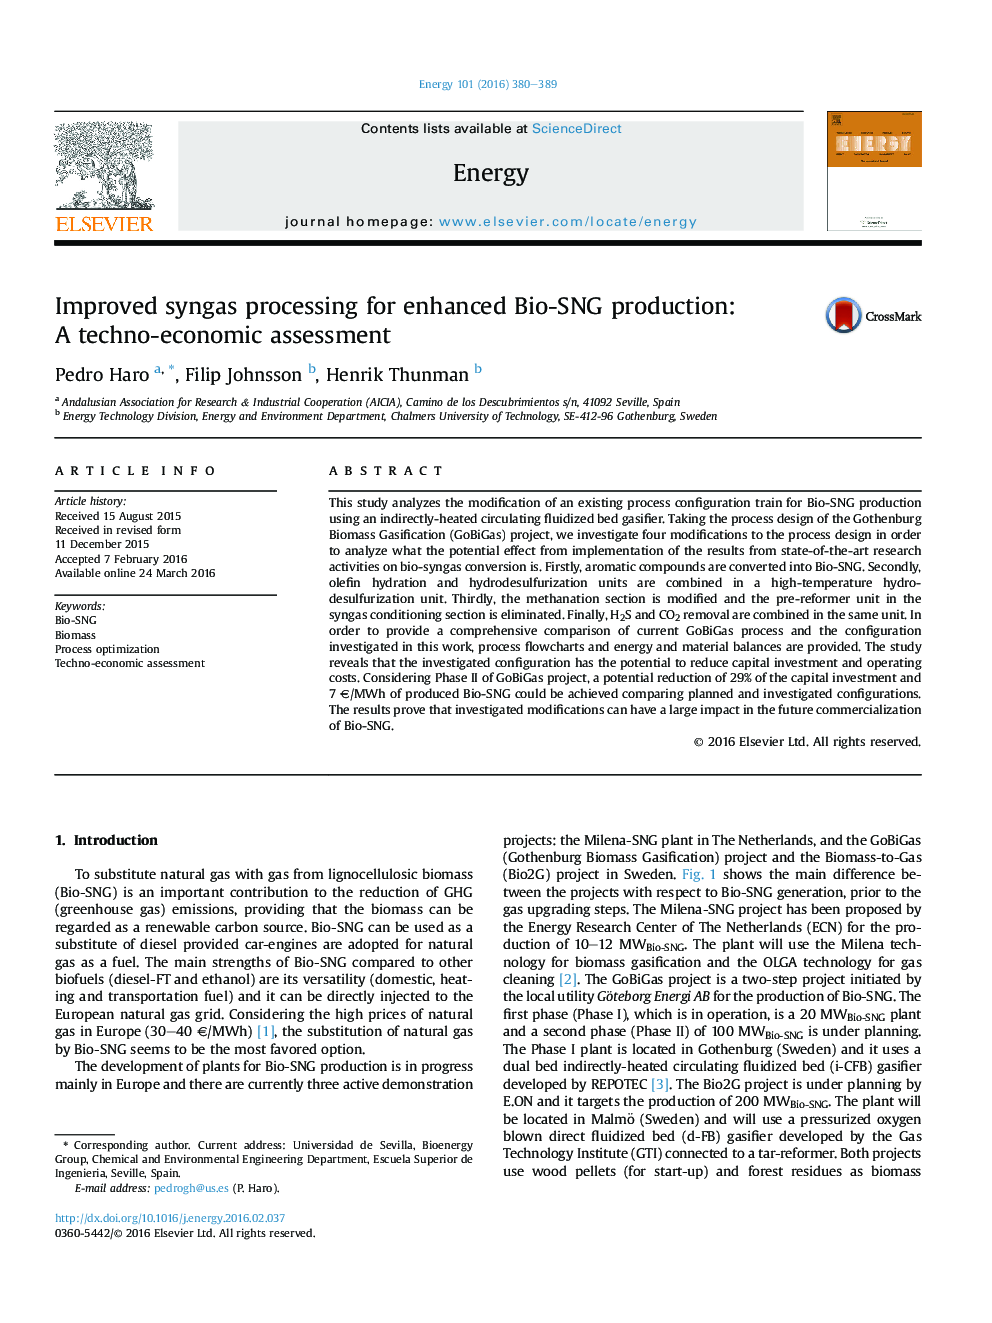 Improved syngas processing for enhanced Bio-SNG production: A techno-economic assessment